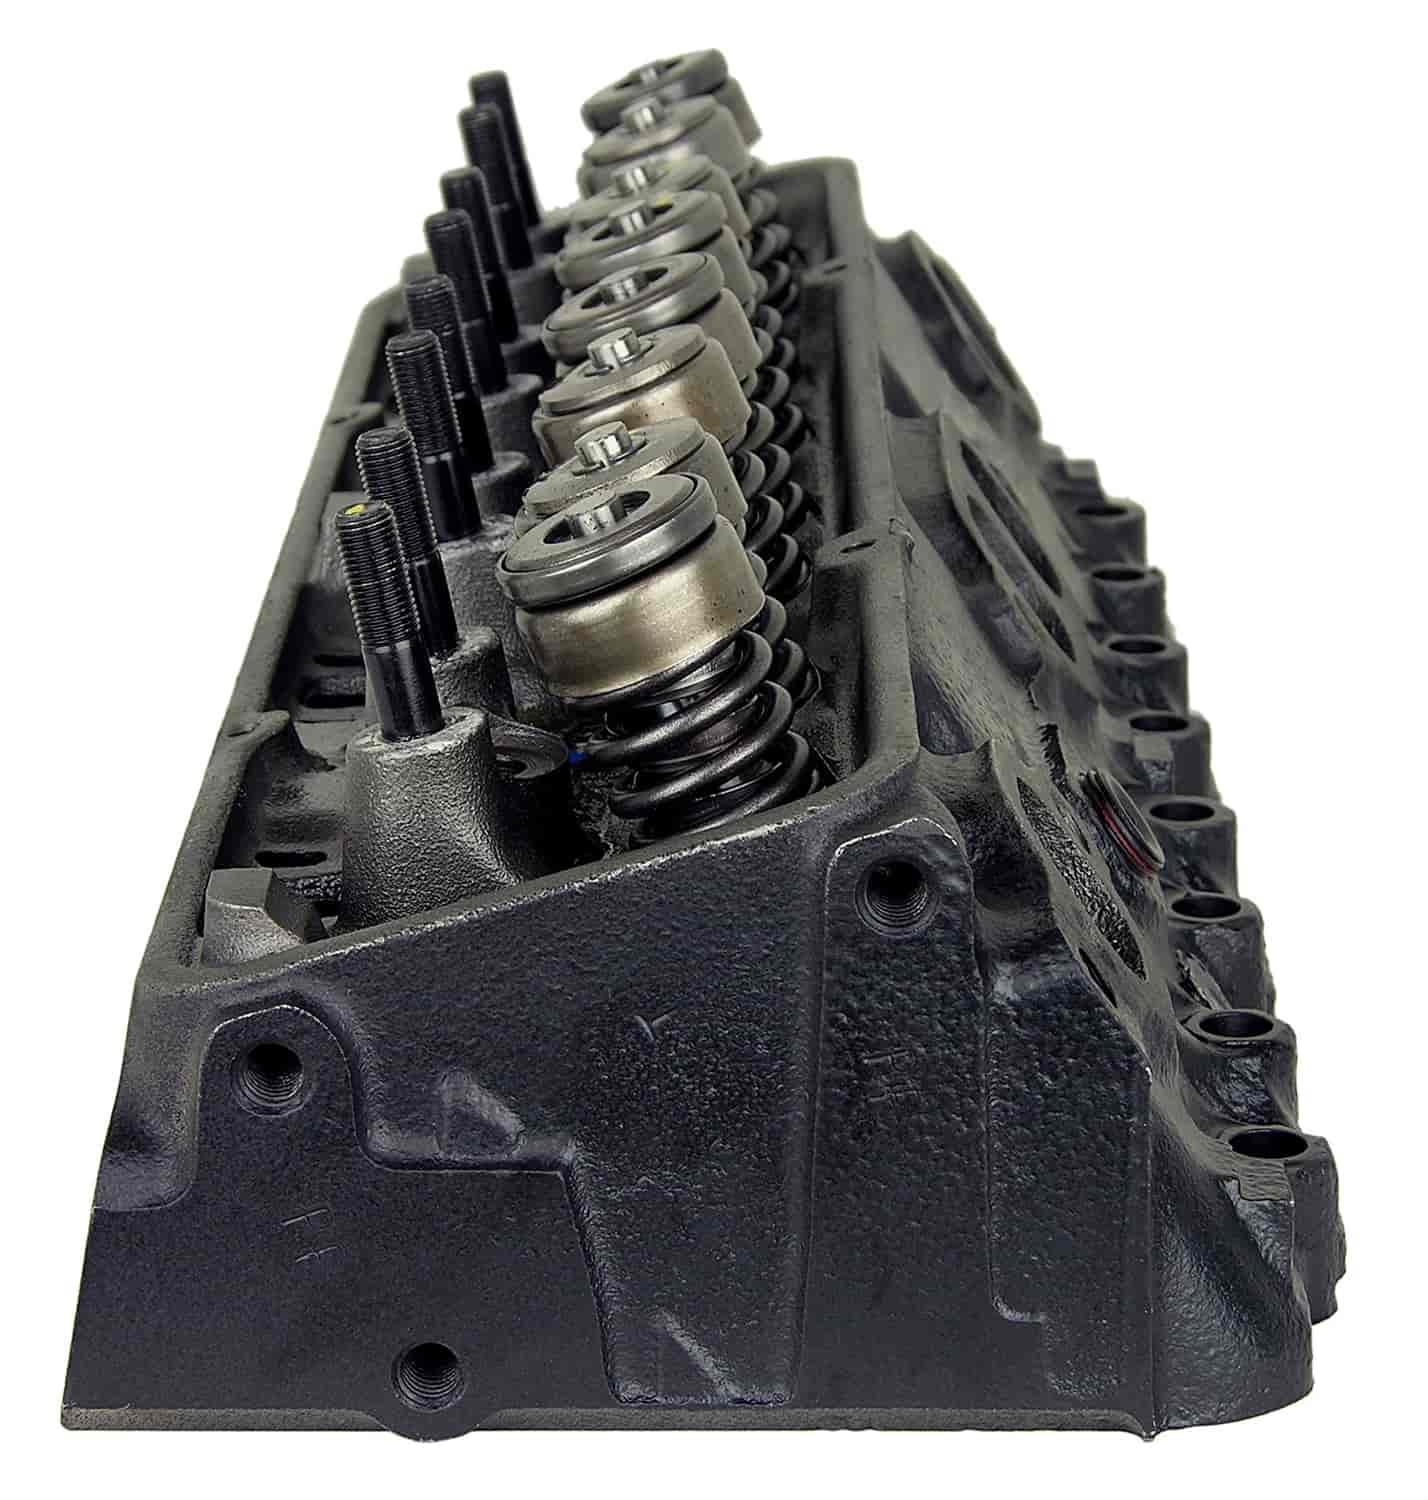 Remanufactured Cylinder Head for 1976-1980 Chevy/GMC Truck with 400ci V8